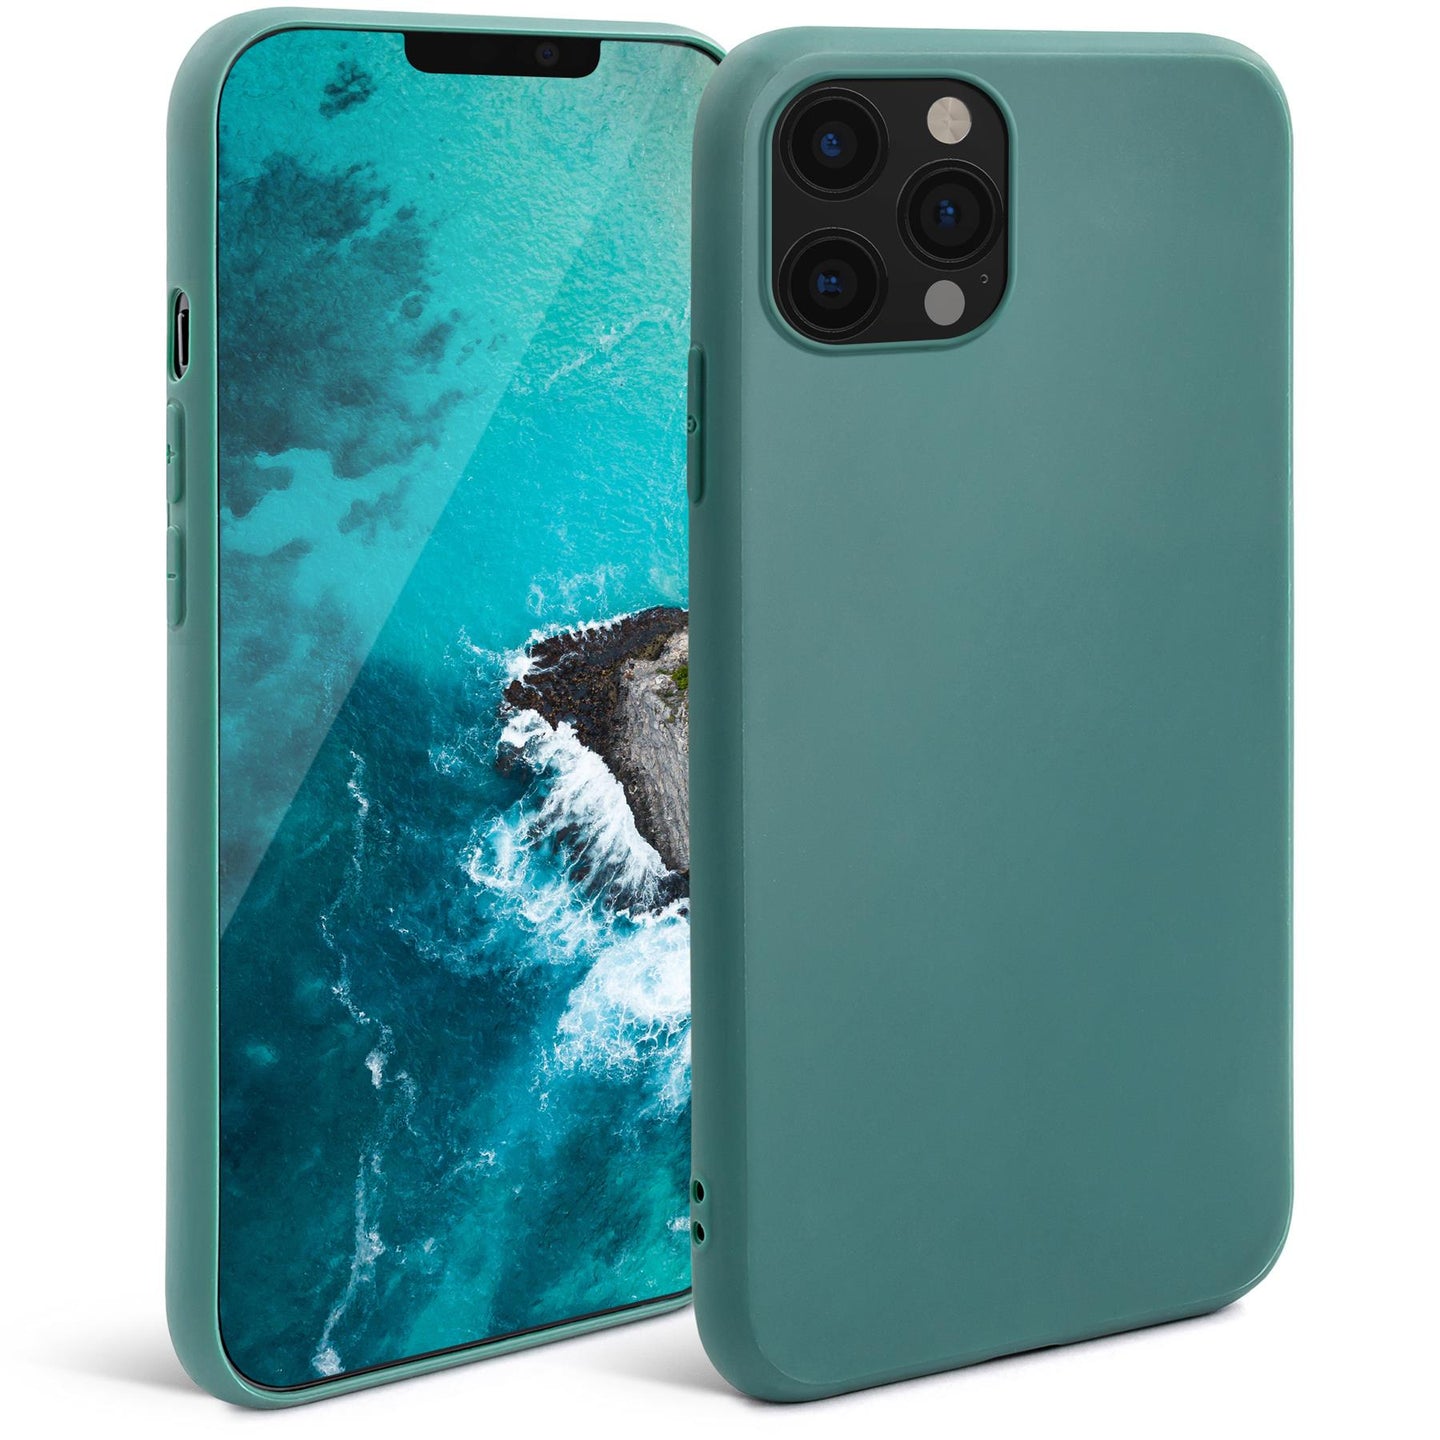 Moozy Minimalist Series Silicone Case for iPhone 12, iPhone 12 Pro, Blue Grey - Matte Finish Slim Soft TPU Cover